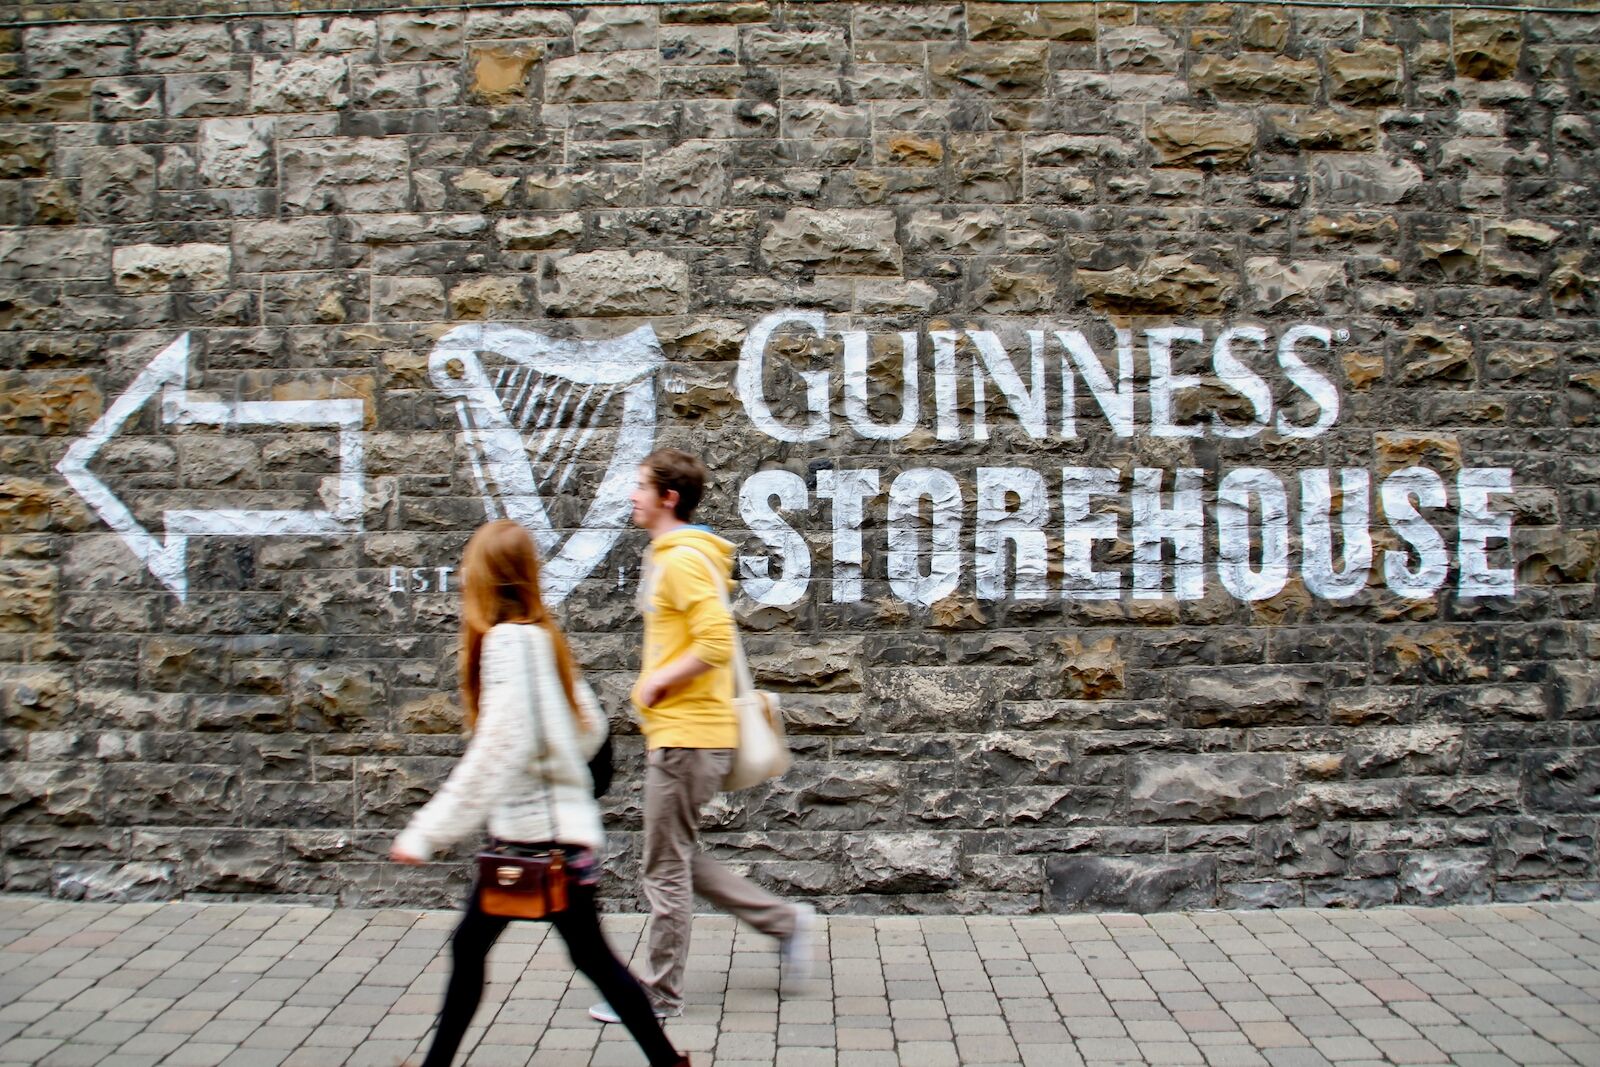 wo youths walk by the a sign of a wall pointing Guinness Storehouse.